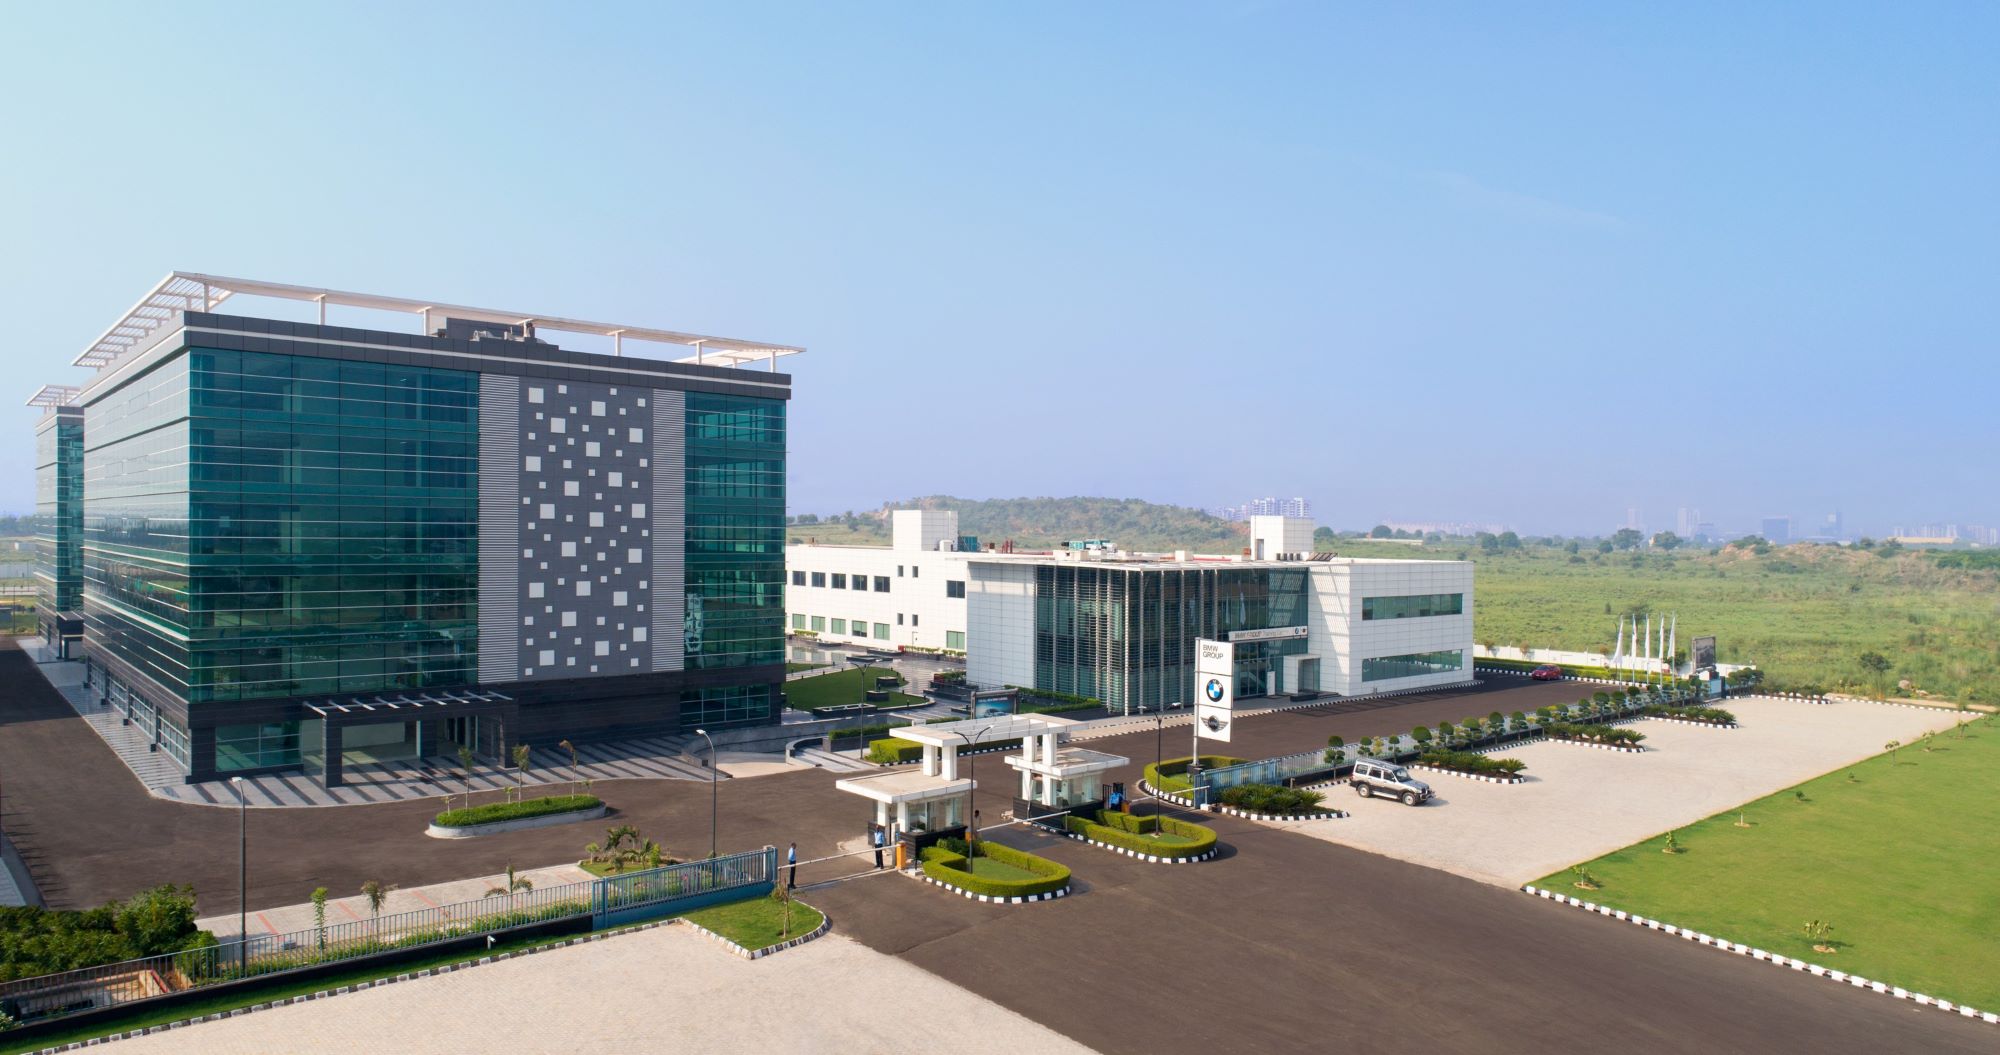 e-novation Centre: India’s first hub for Corporate R&D, trainings and innovation